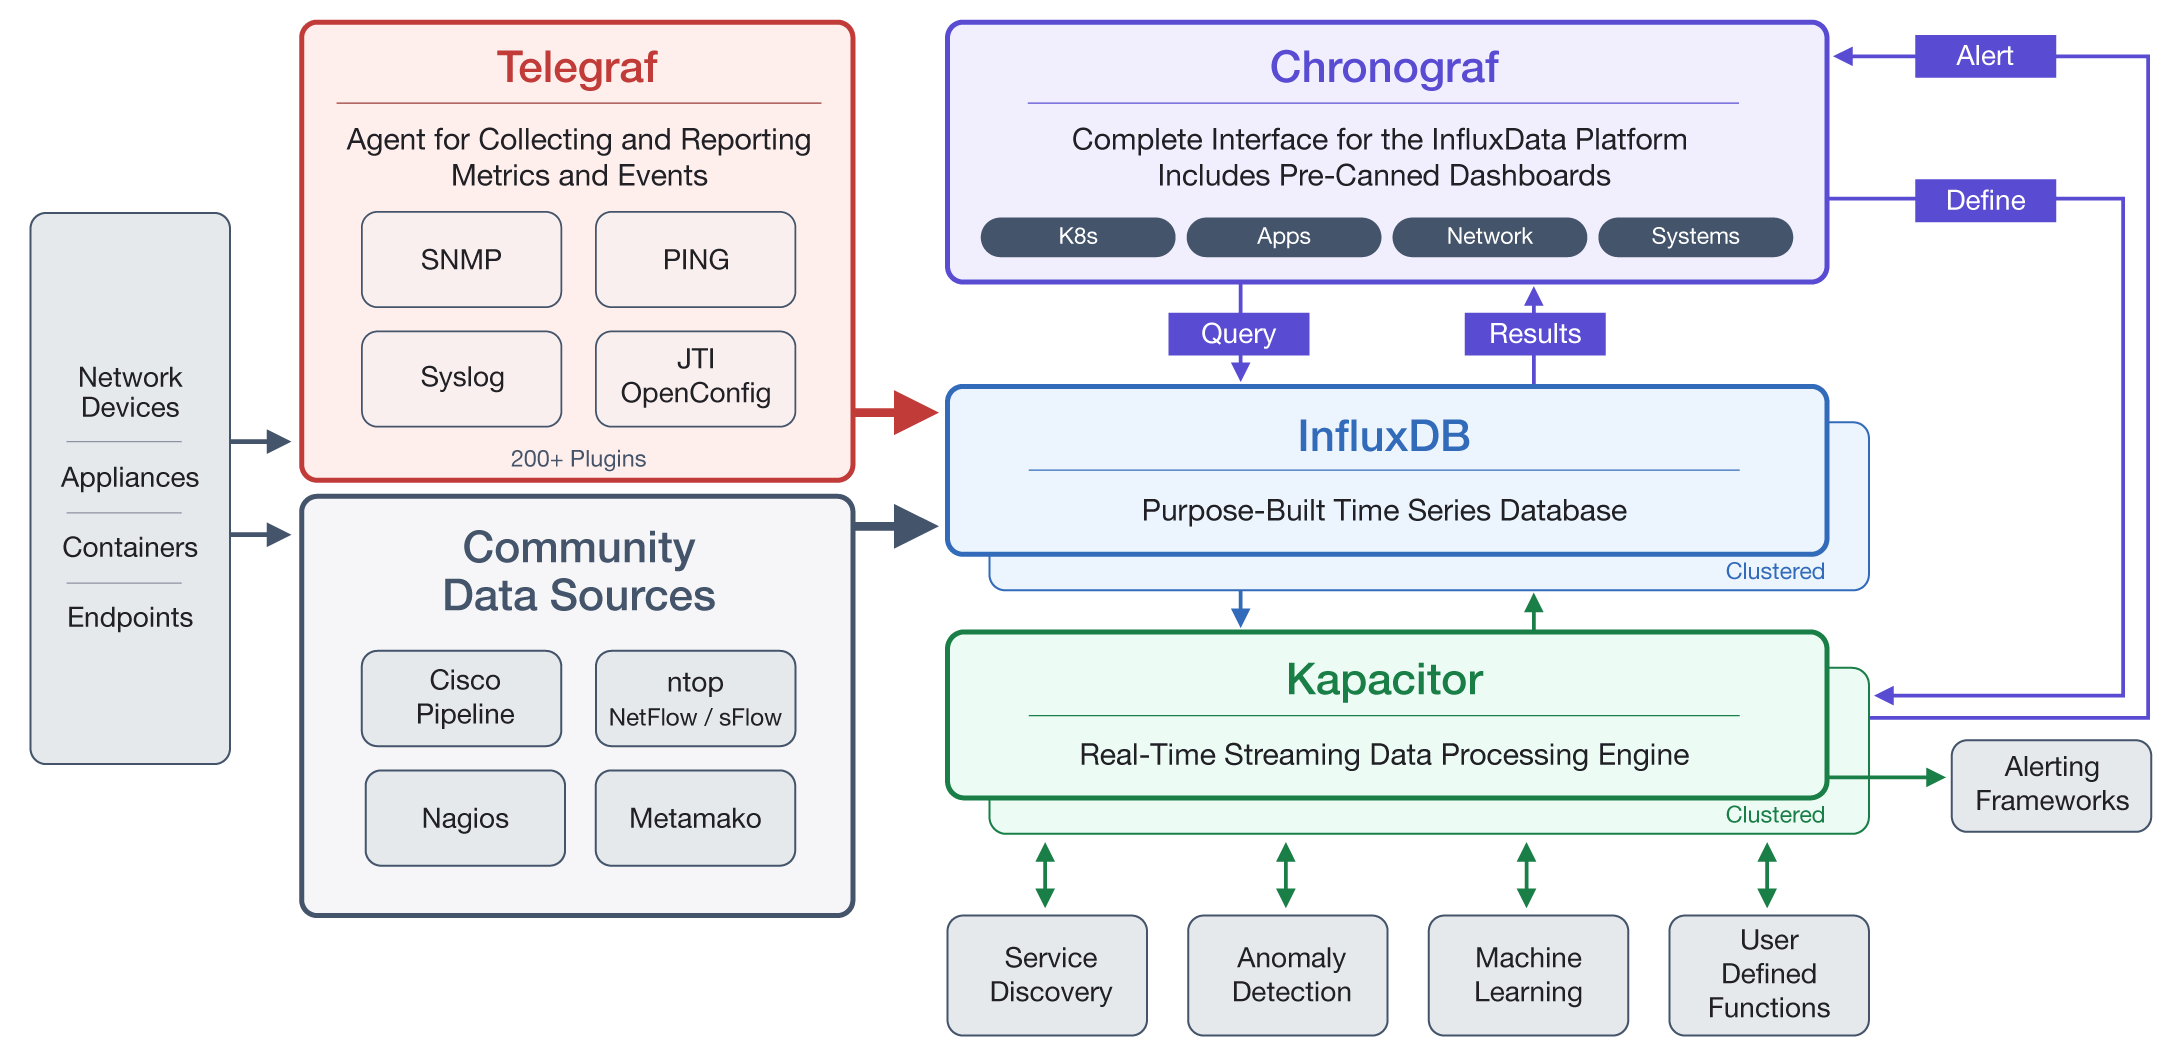 InfluxDB's TICK stack architecture, including Telegraf, Chronograf, and Kapacitor